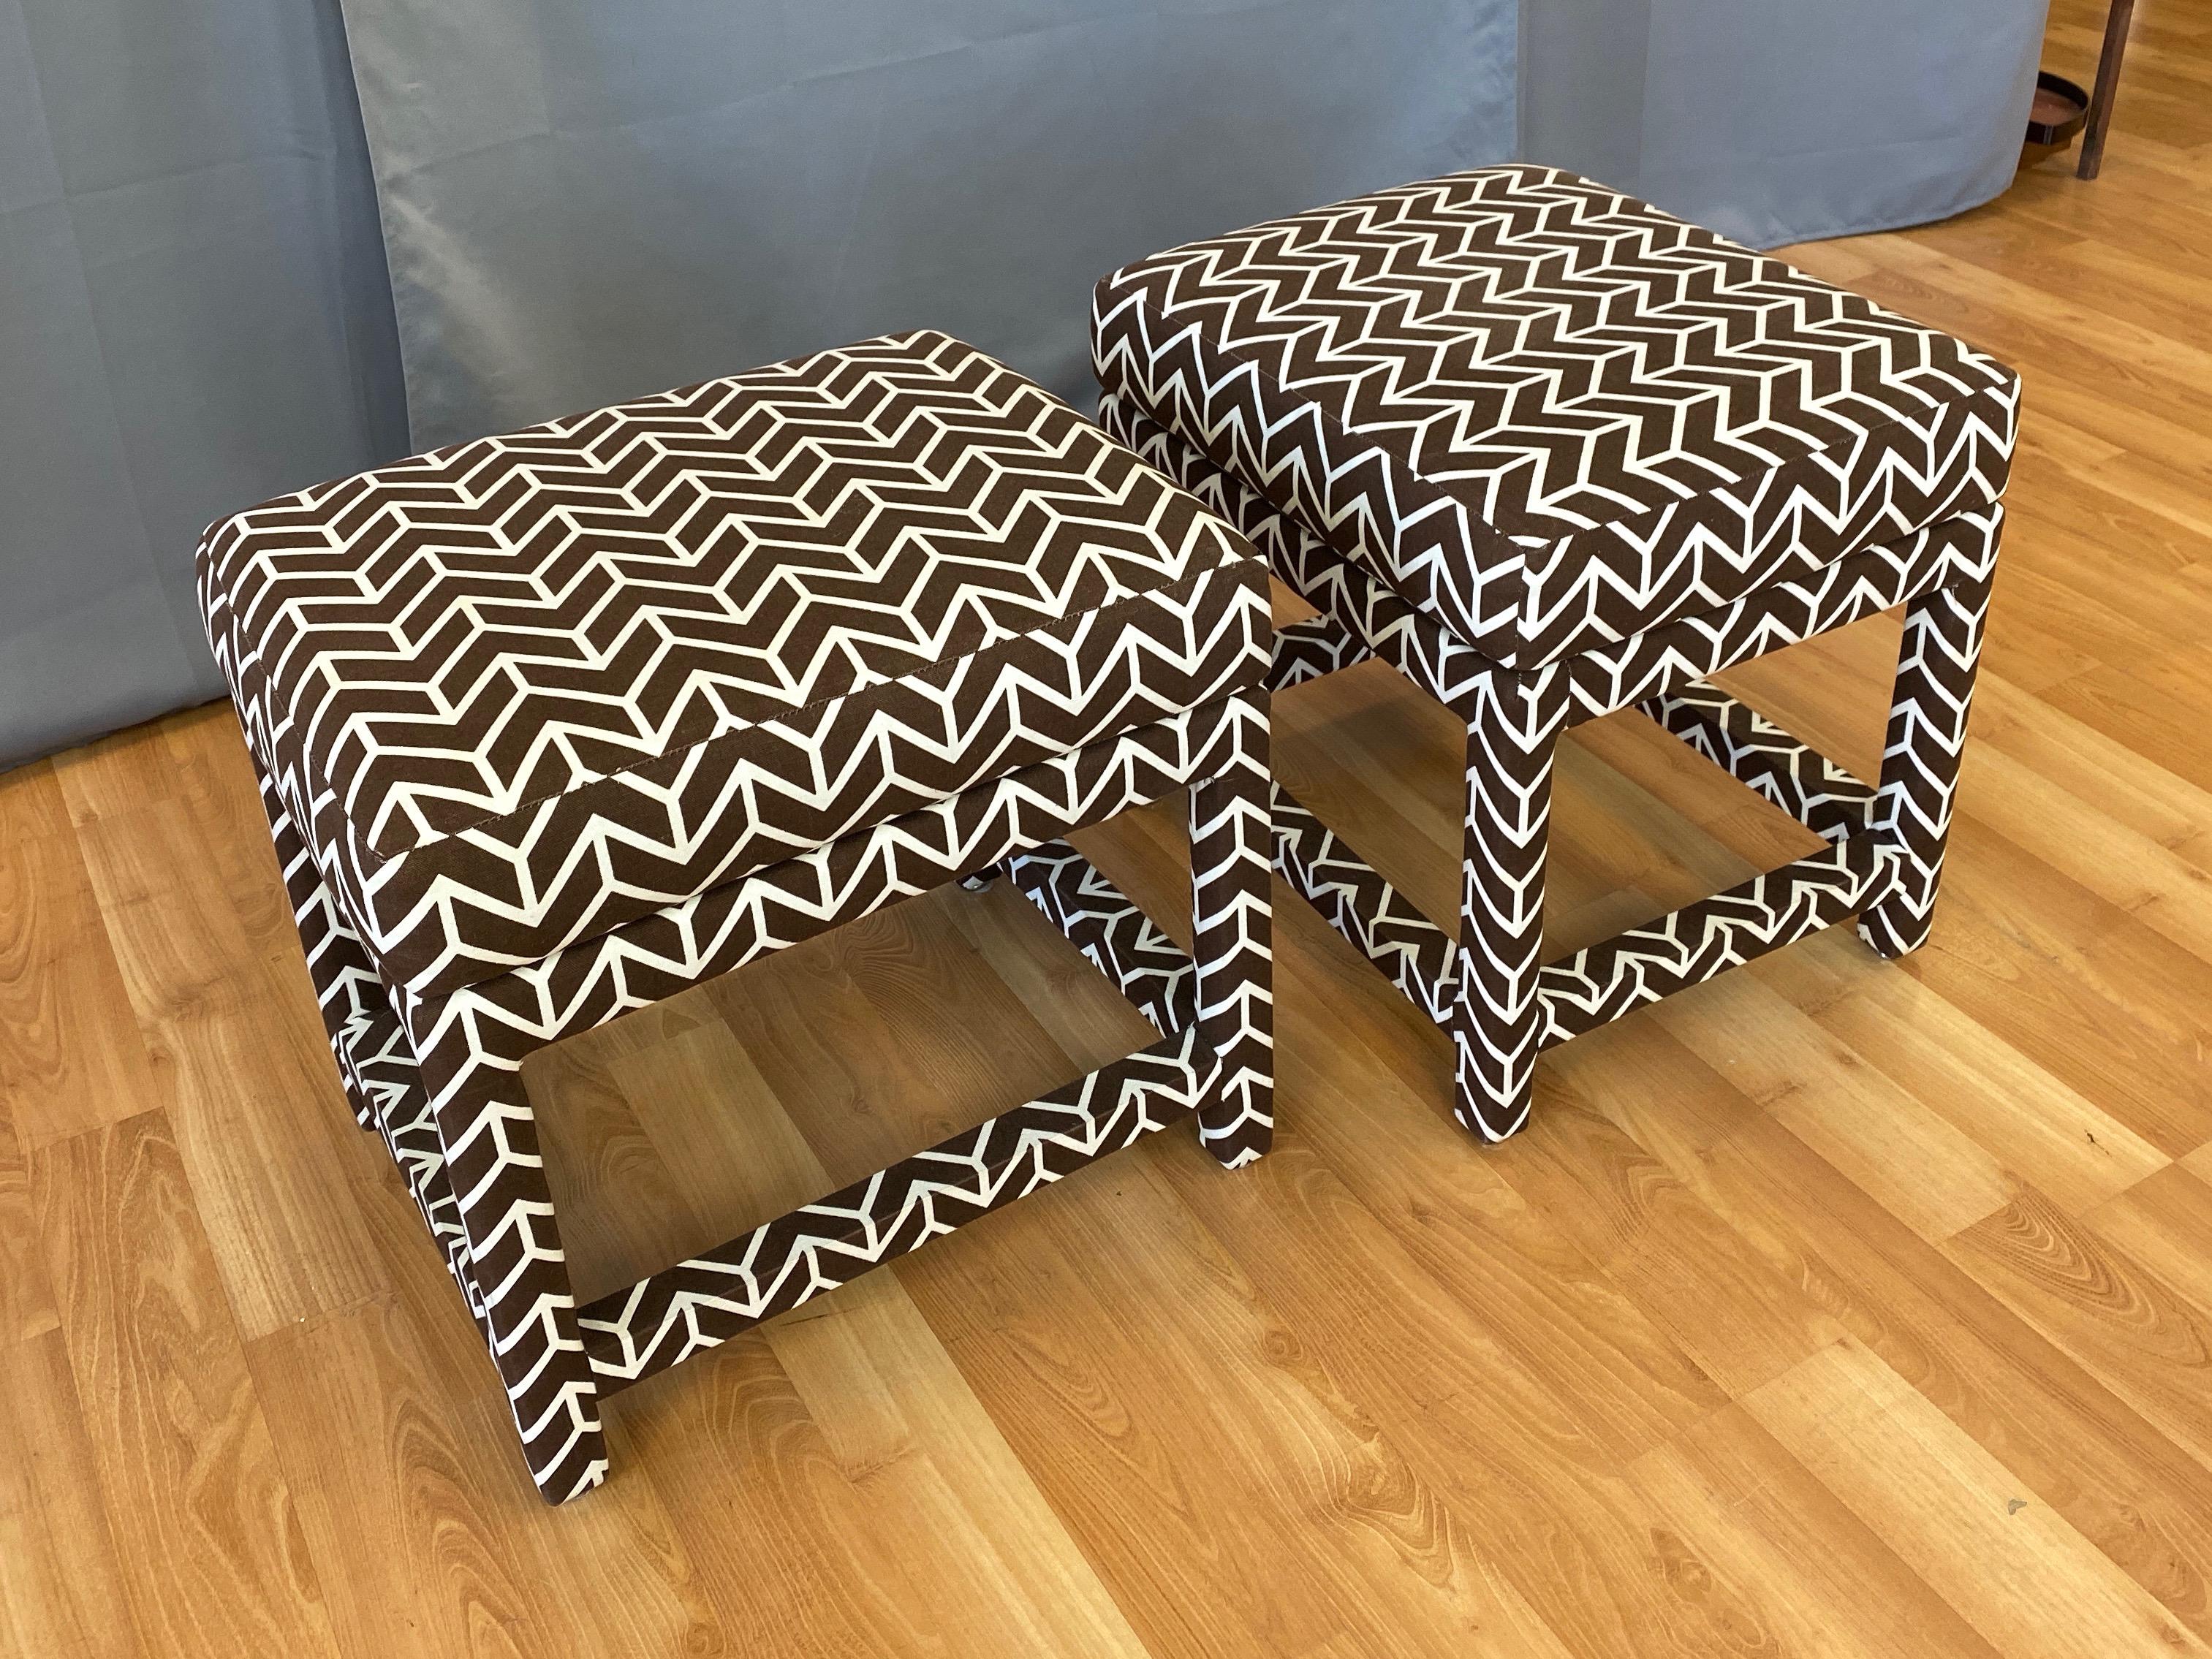 Pair of Milo Baughman for Thayer Coggin Ottomans with David Hicks Upholstery 2